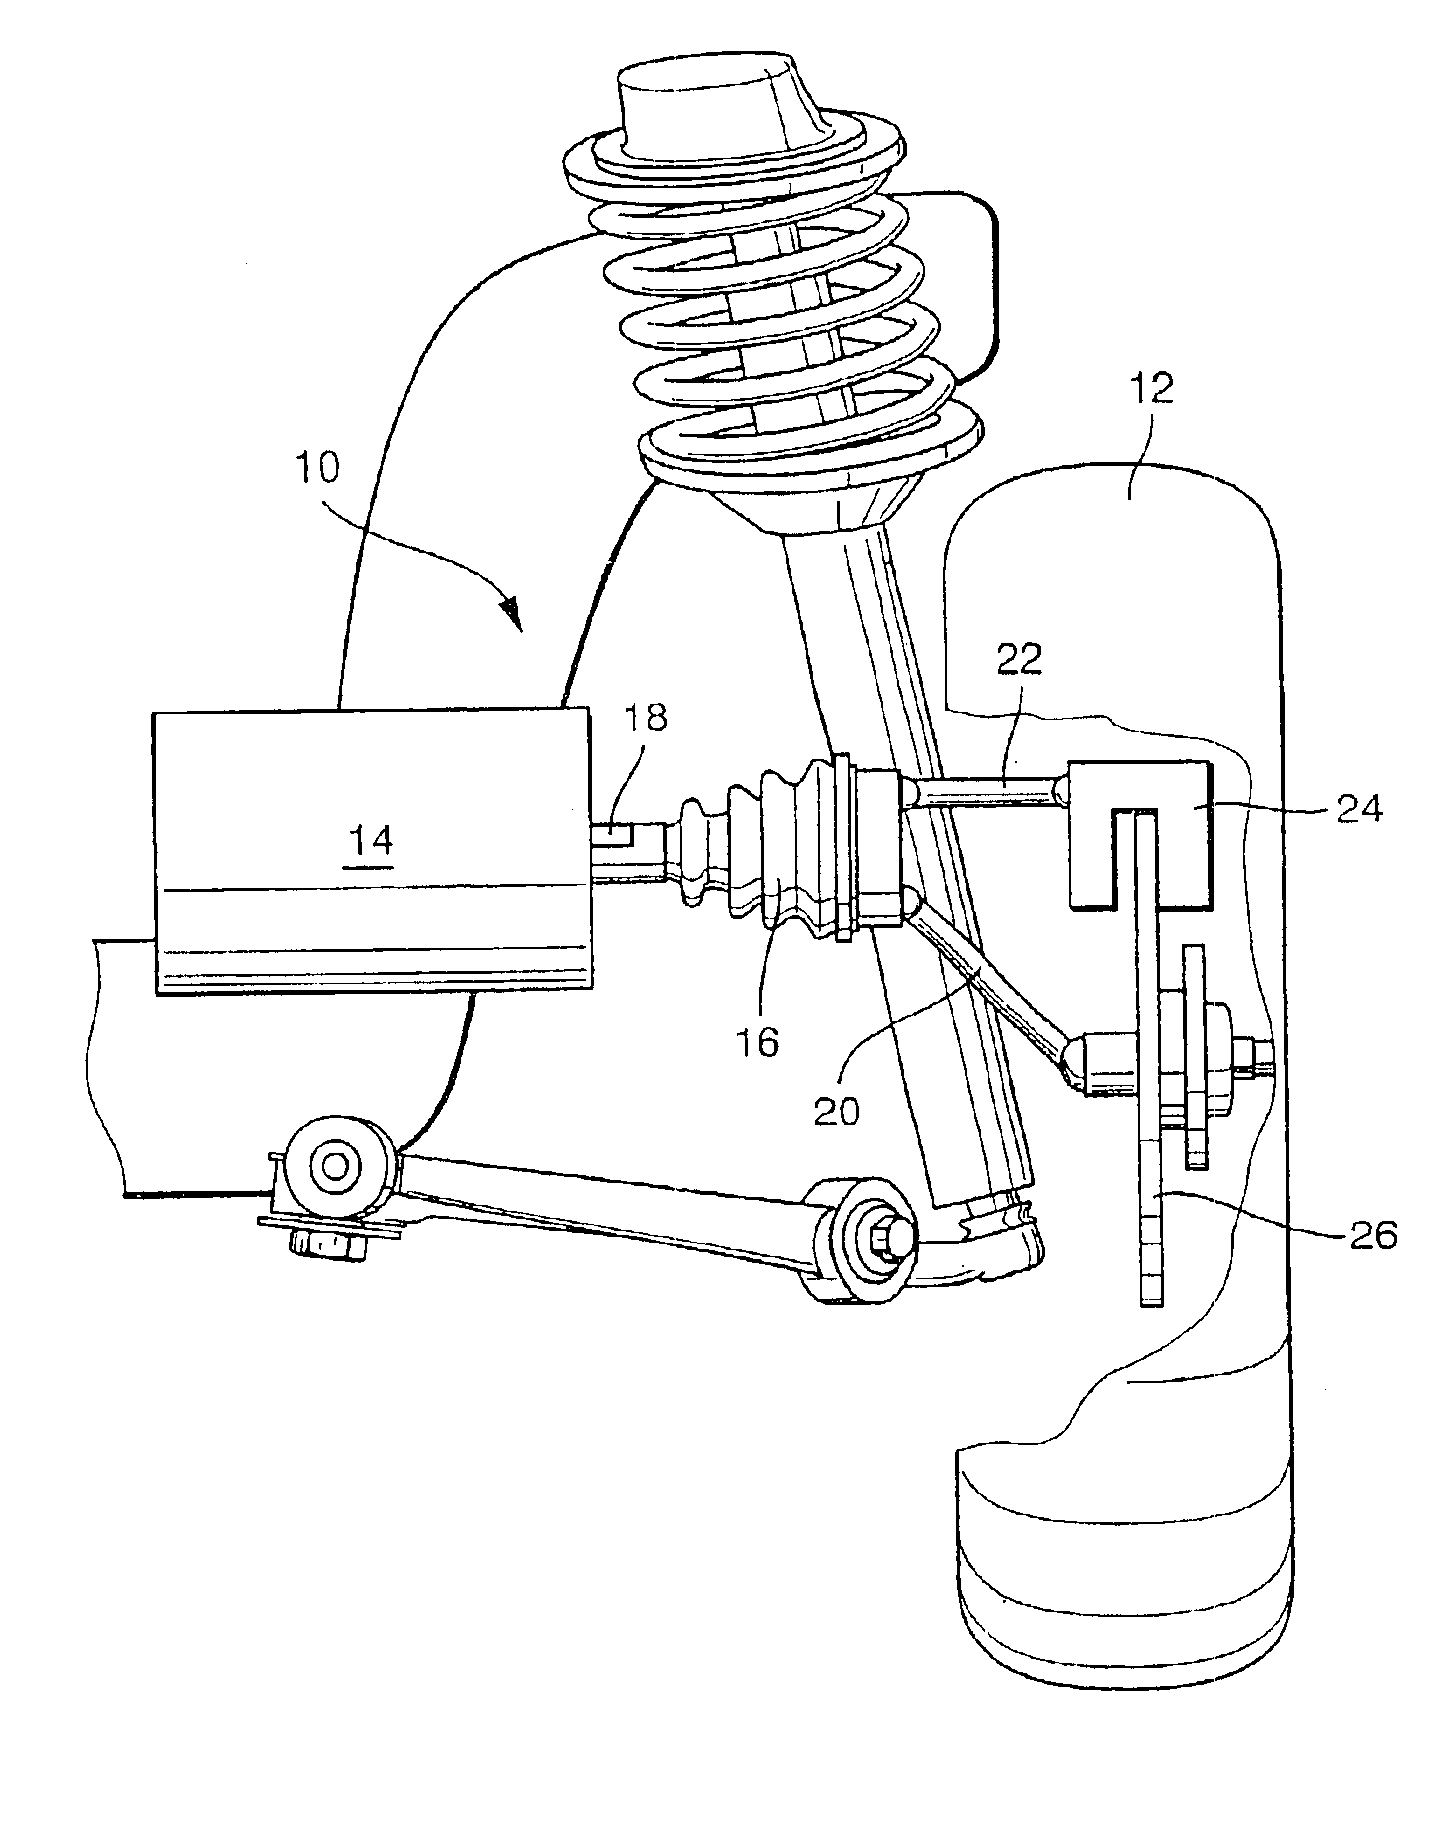 Electrical drive for a vehicle